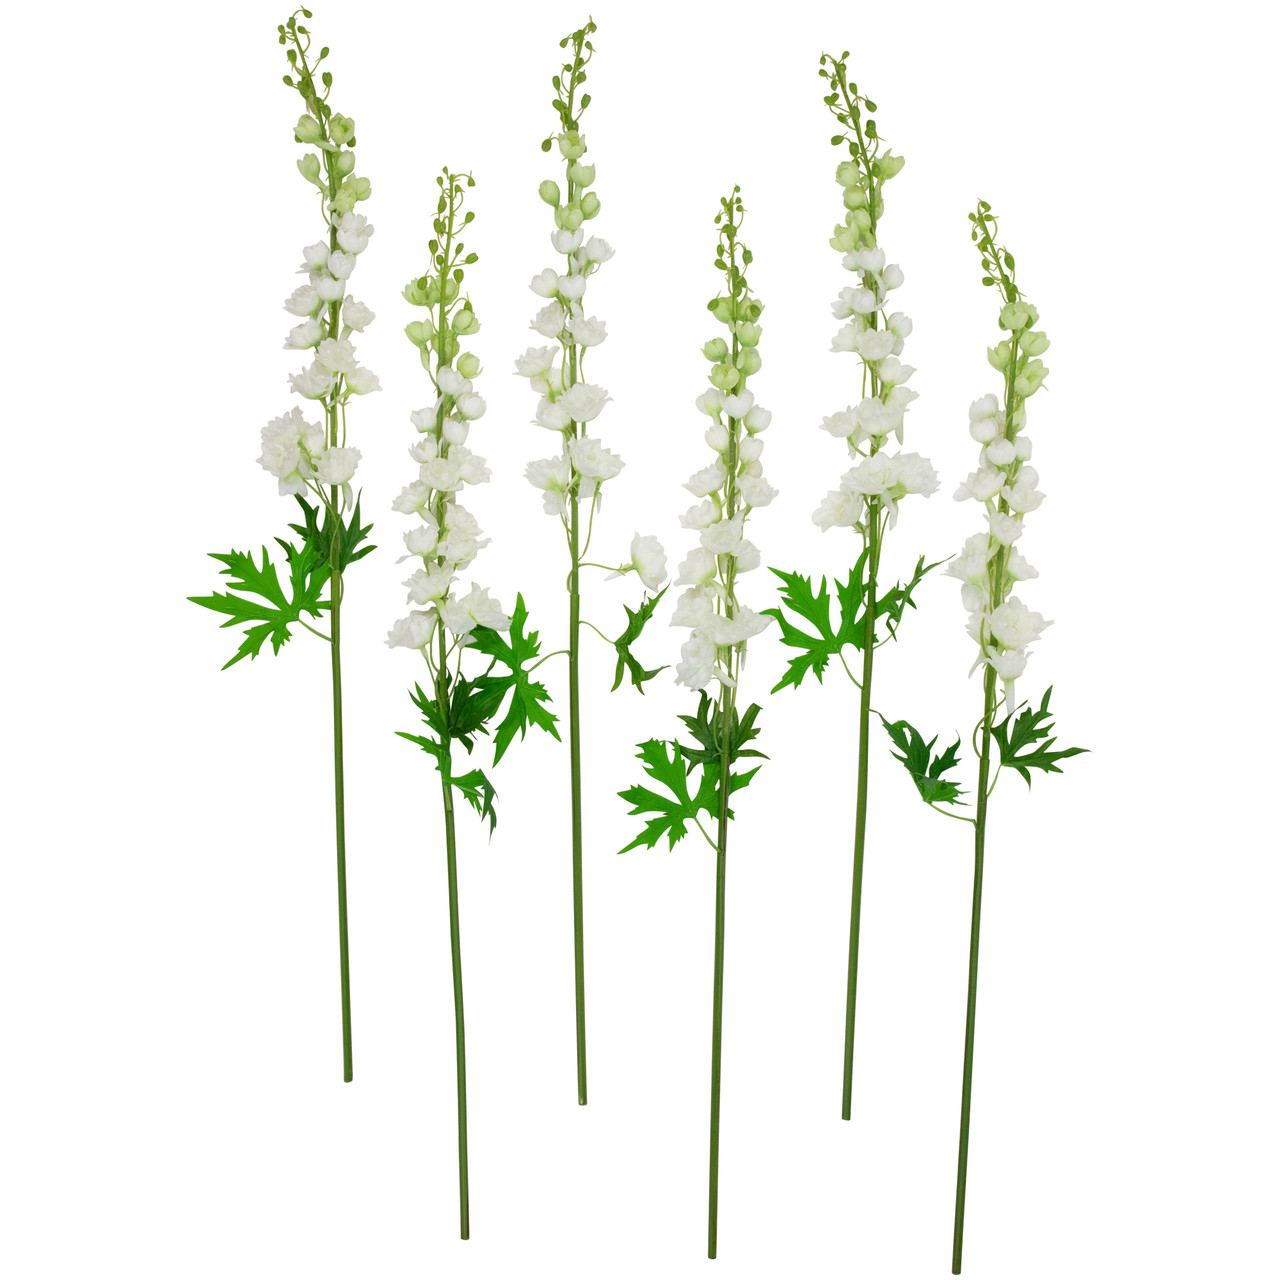 Real Touch™ White Delphinium Artificial Floral Stems, Set of 6 - 40